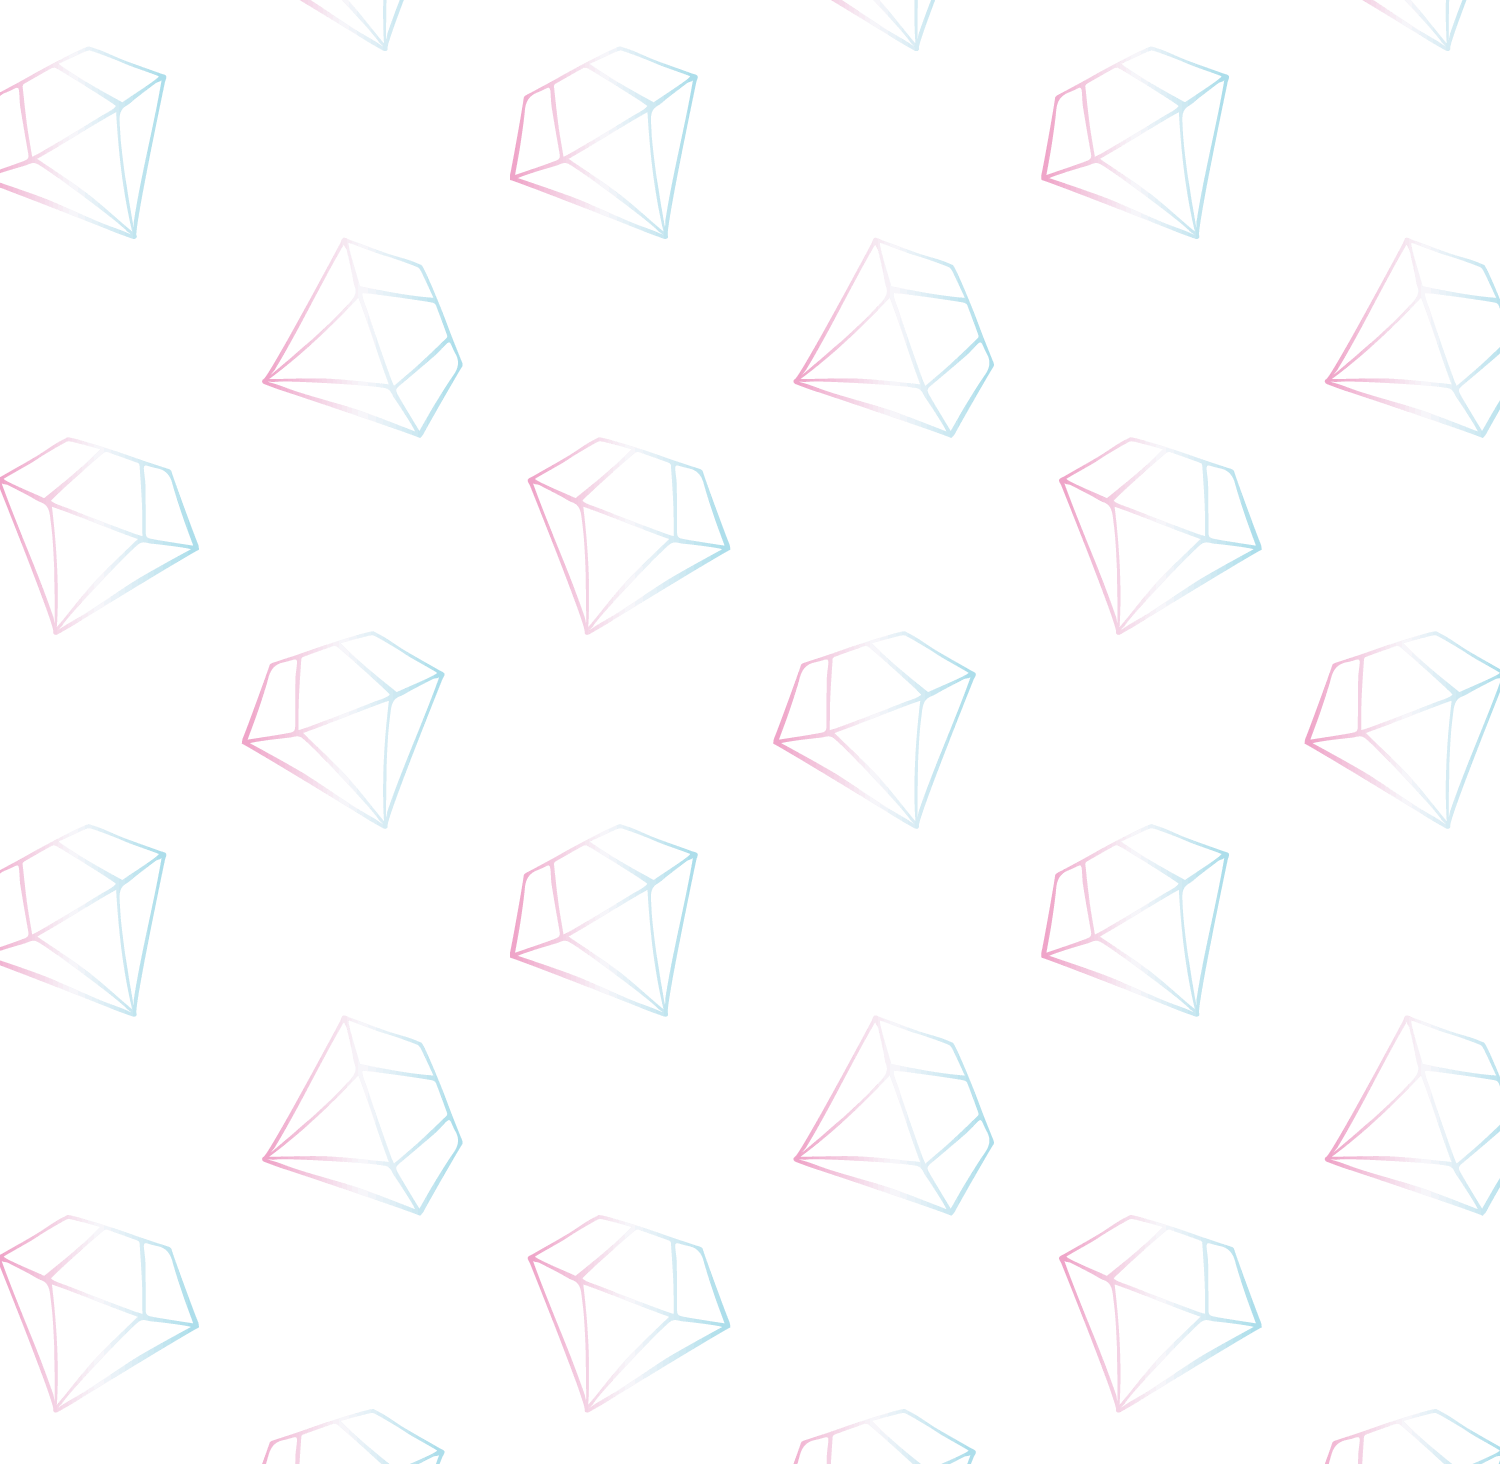 Repeating pattern of diamond icons.